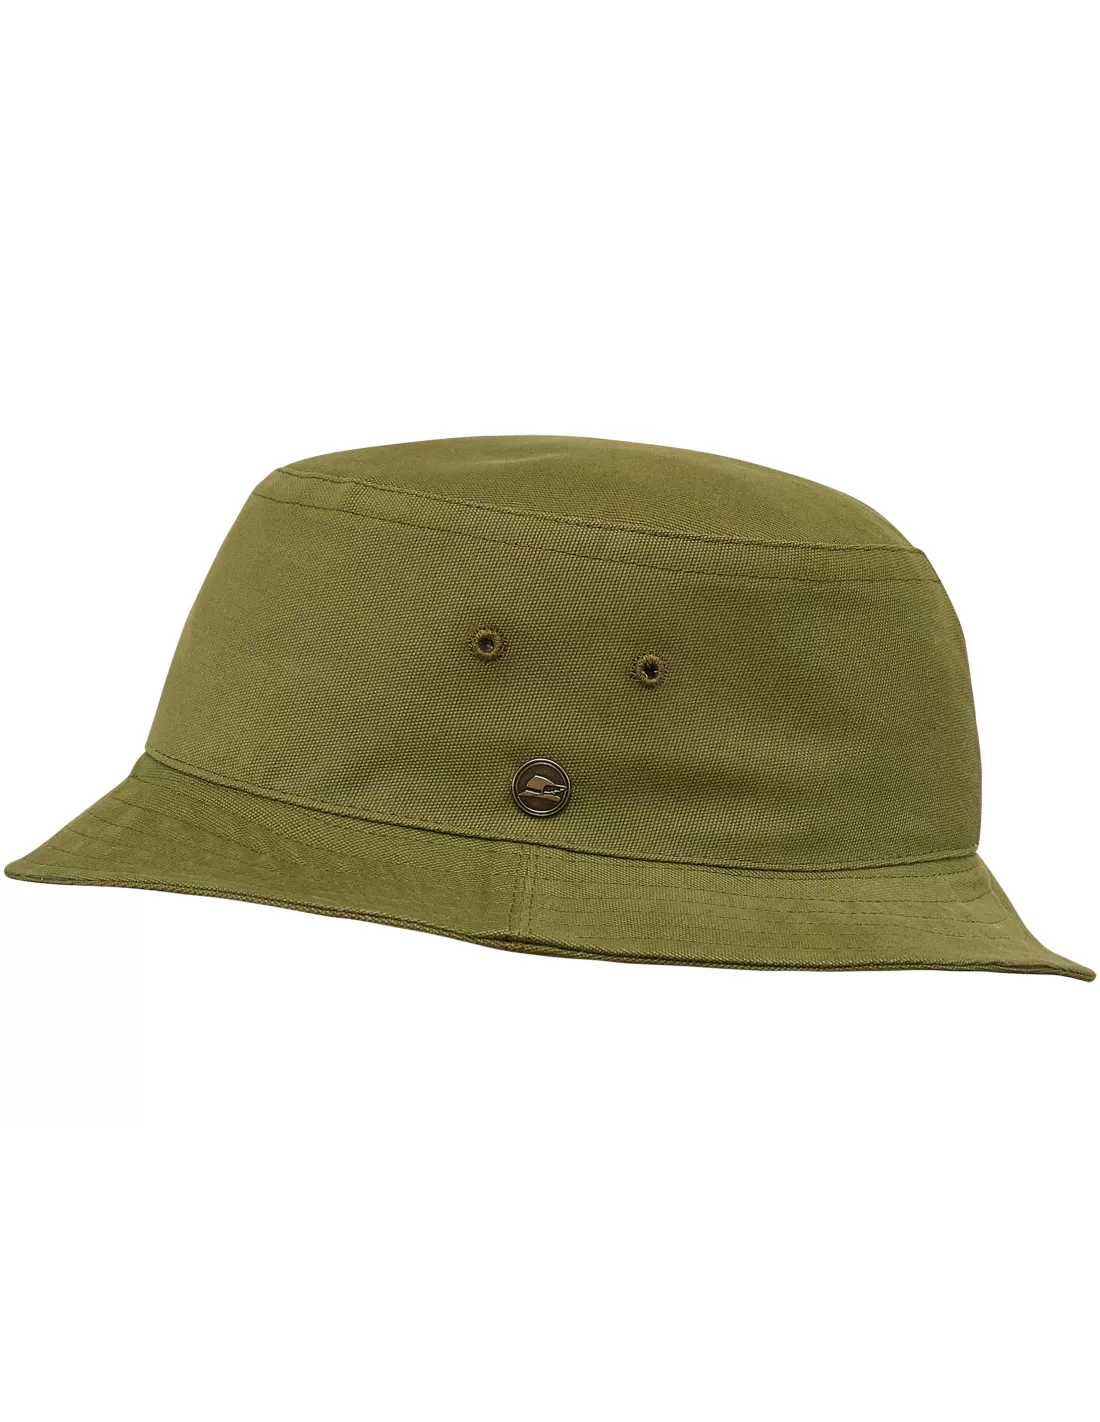 Solid & Camo Colors! Classic 100% Cotton Soft Bucket Fishing Golfing Hat 